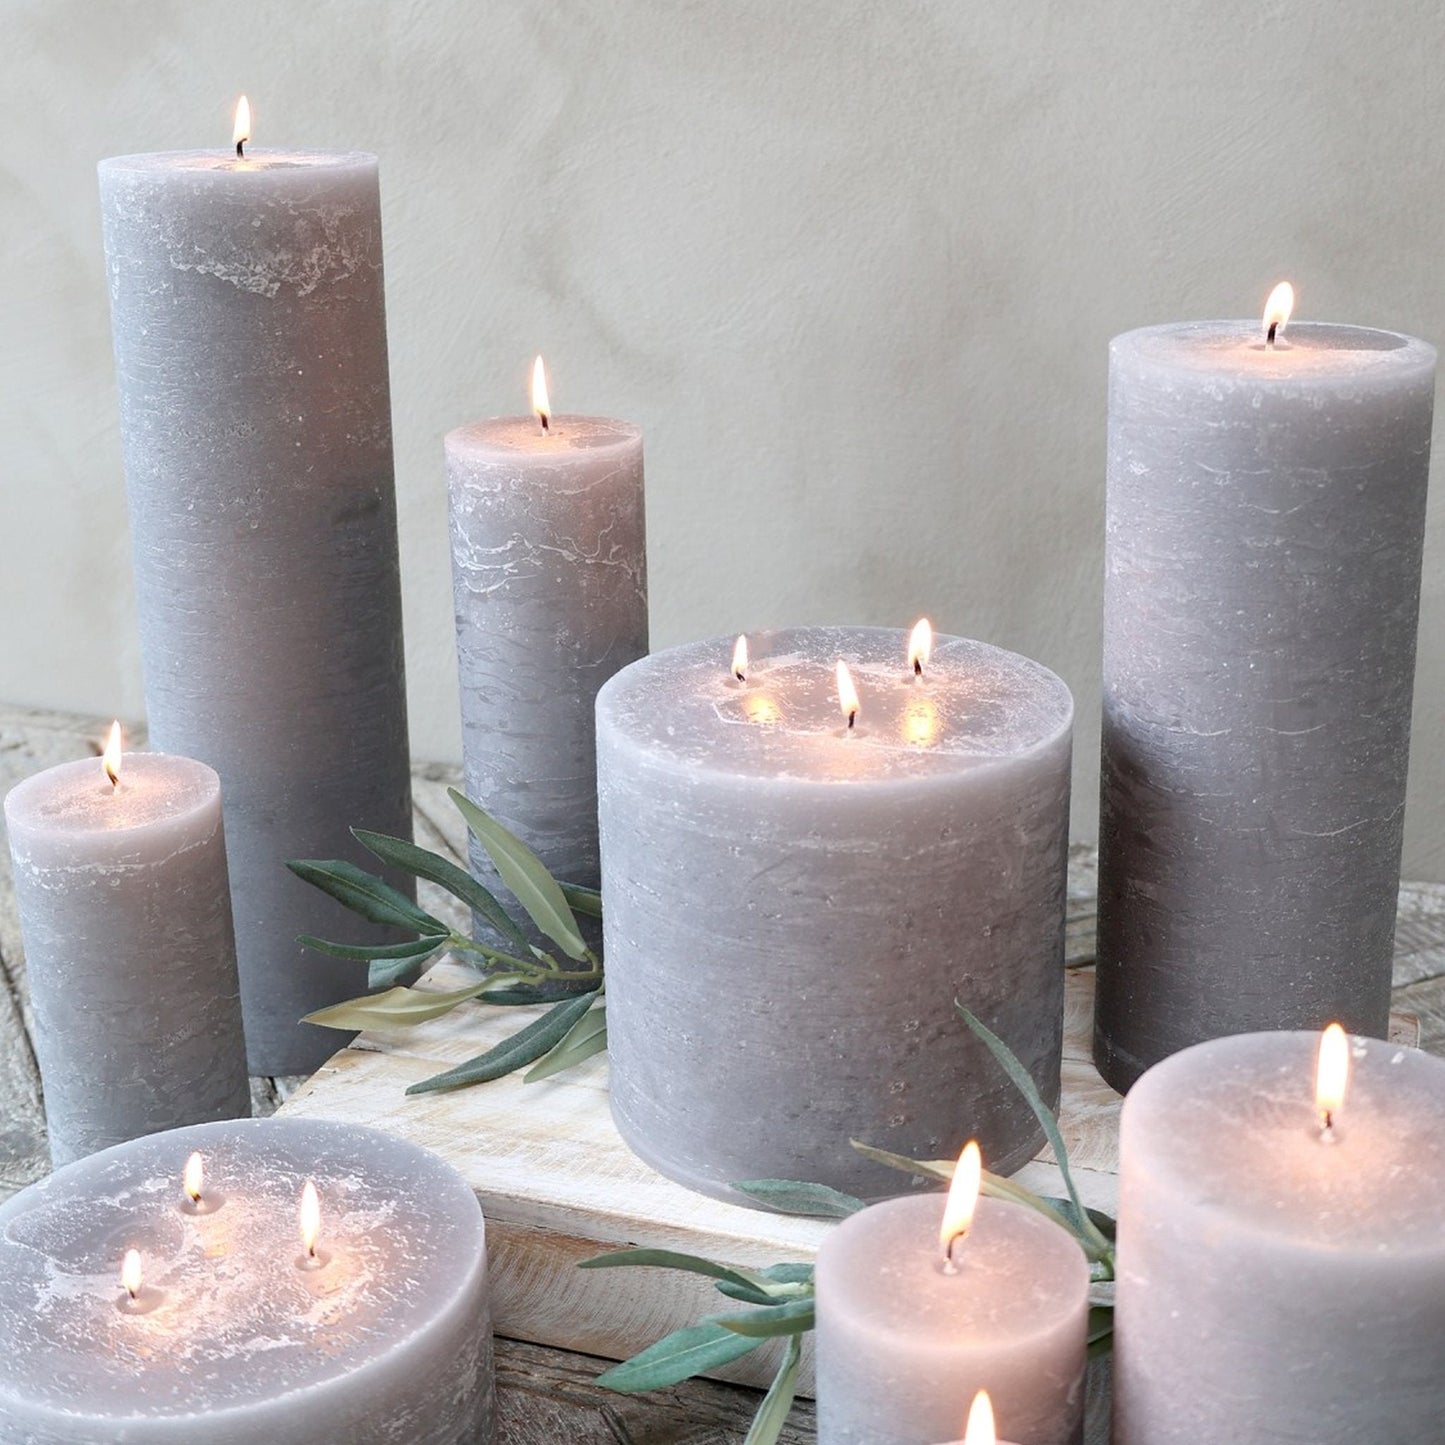 French Grey Rustic Pillar Candle 16 hours - Bumble Living